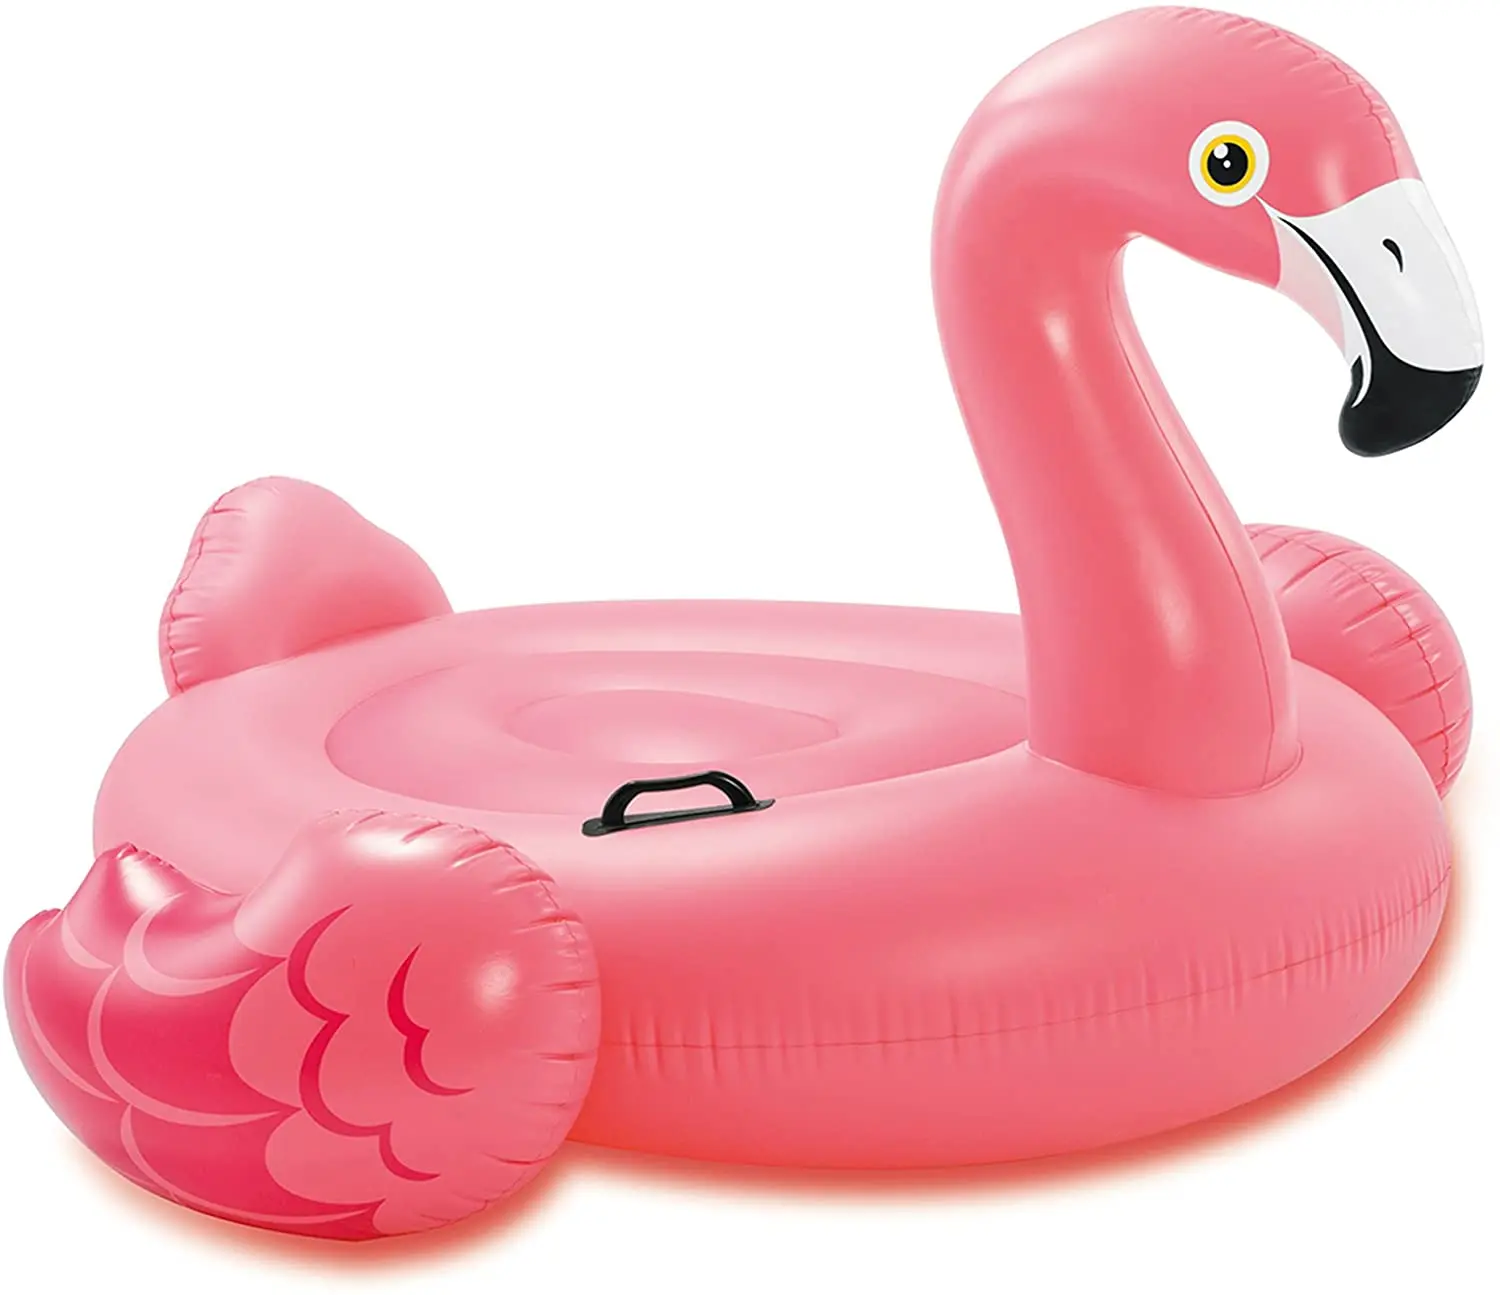 

Large Inflatable Flamingo Fun Beach Floaties Swim Party Toys Pool Island Summer Pool Float Children Adults